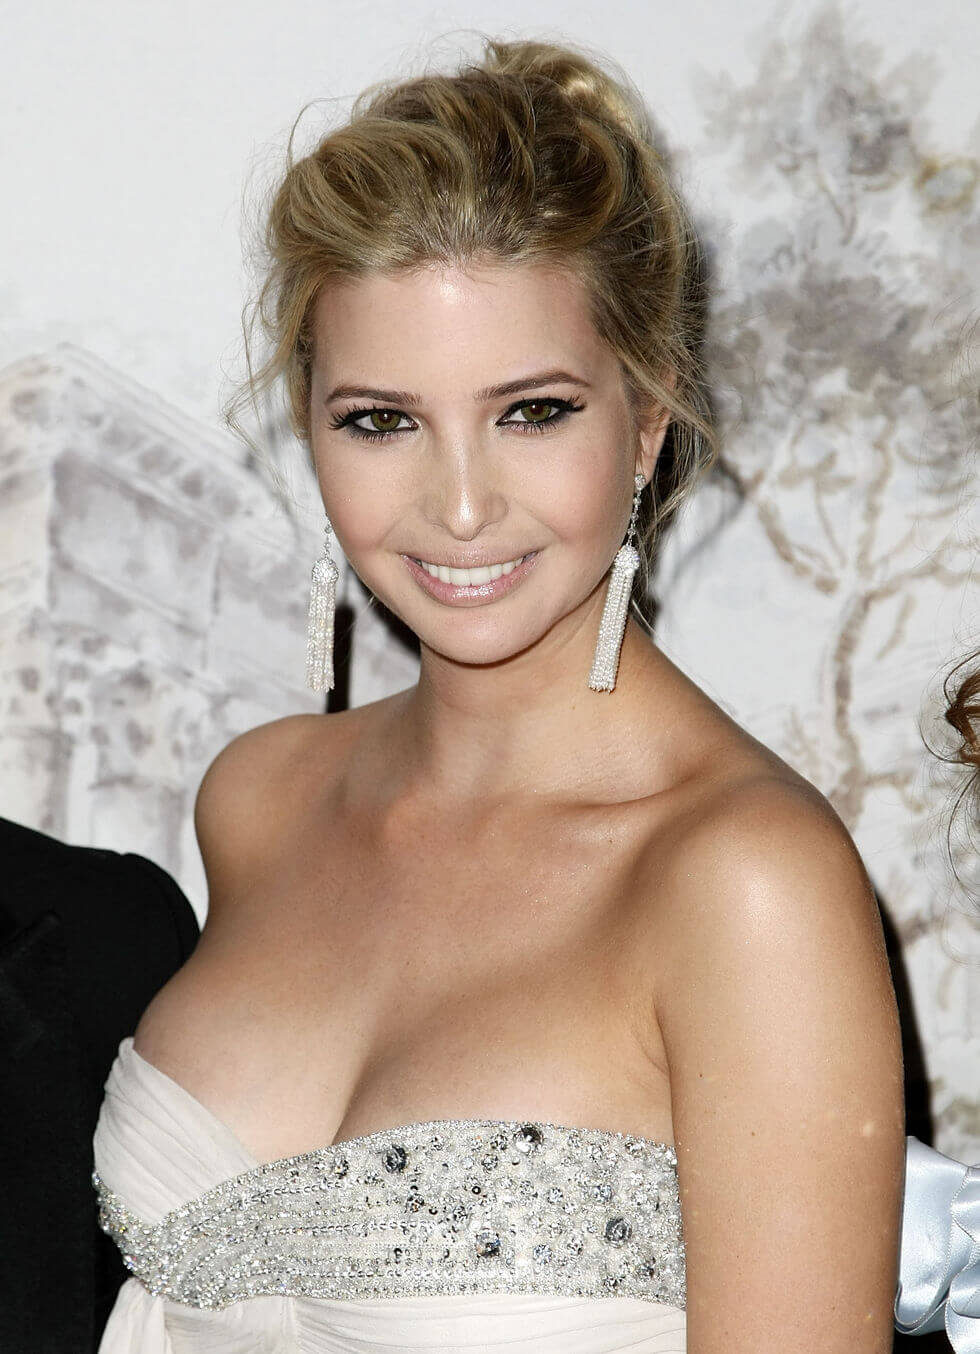 49 Ivanka Trump Nude Pictures Can Make You Submit To Her Glitzy Looks 182